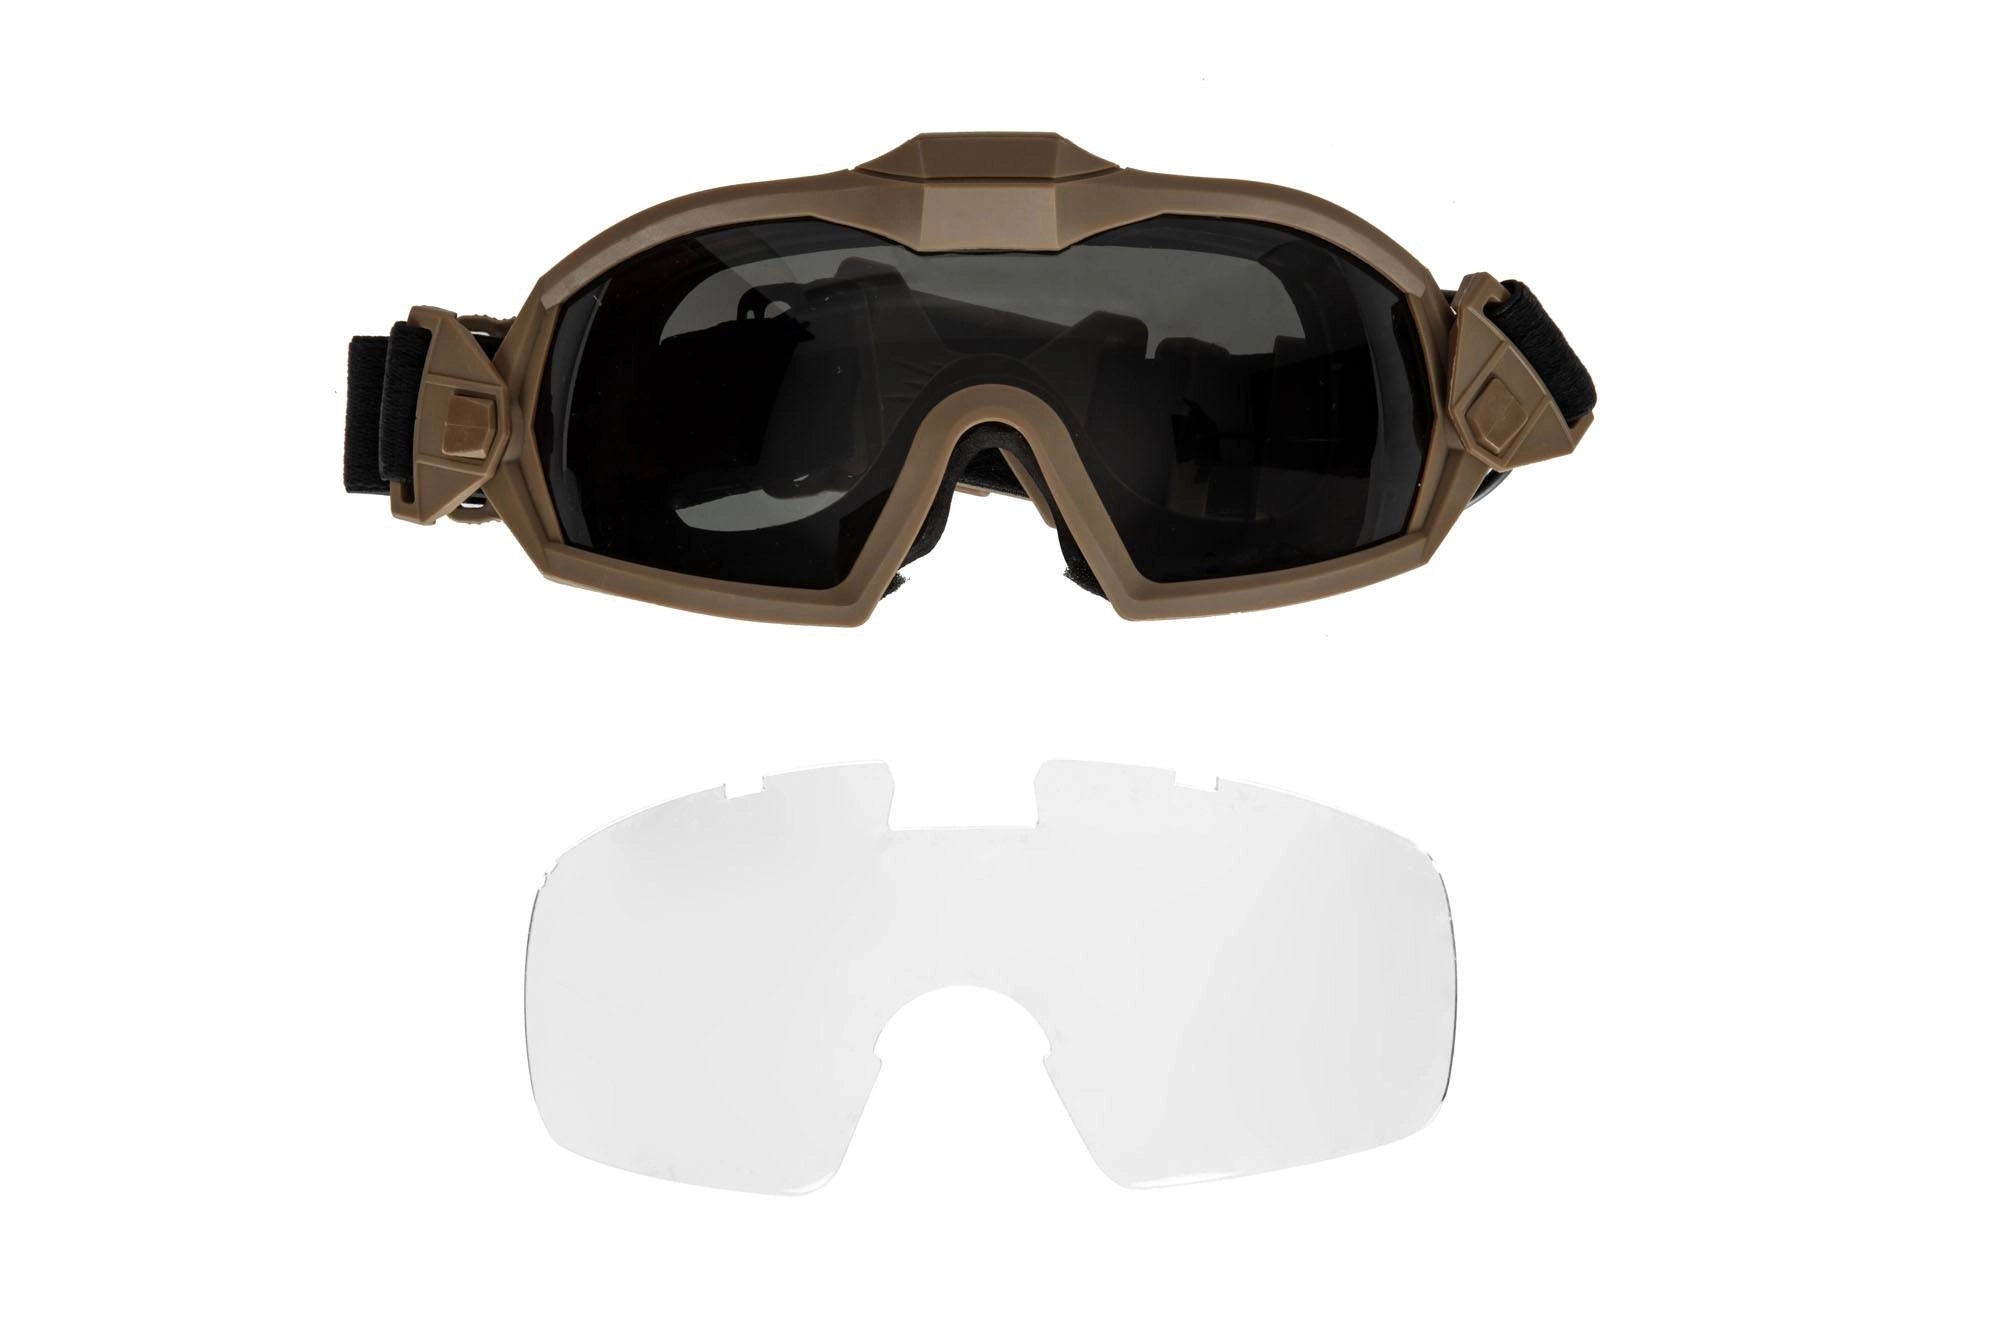 Tactical goggles with fan